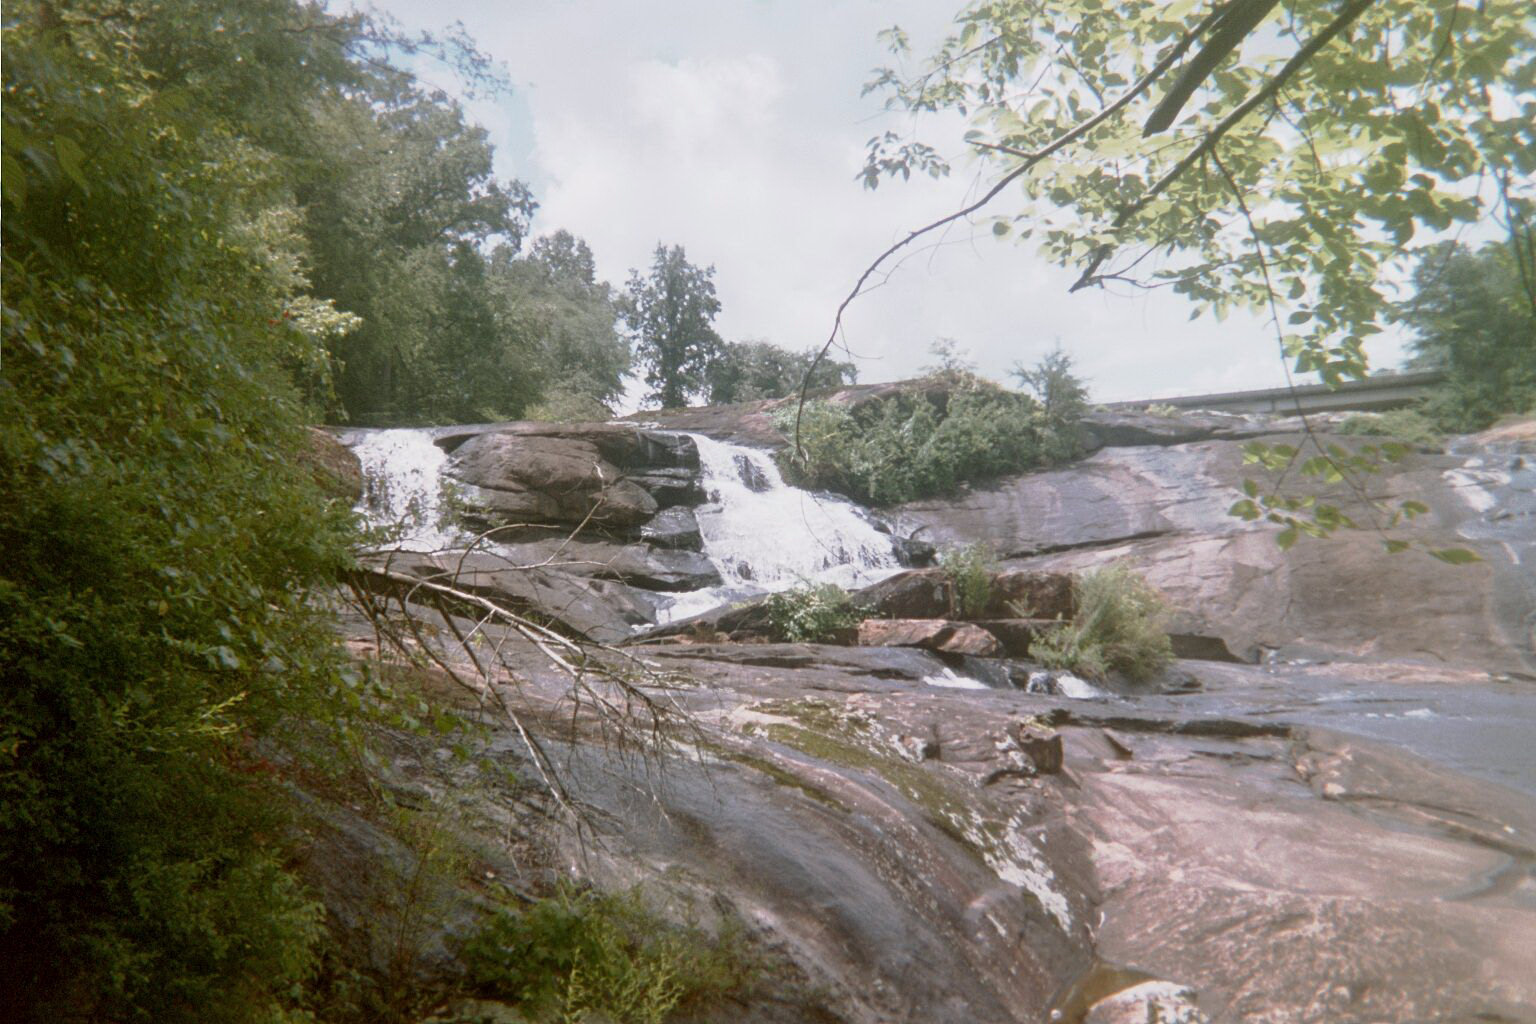 Click for link to High Falls Park.